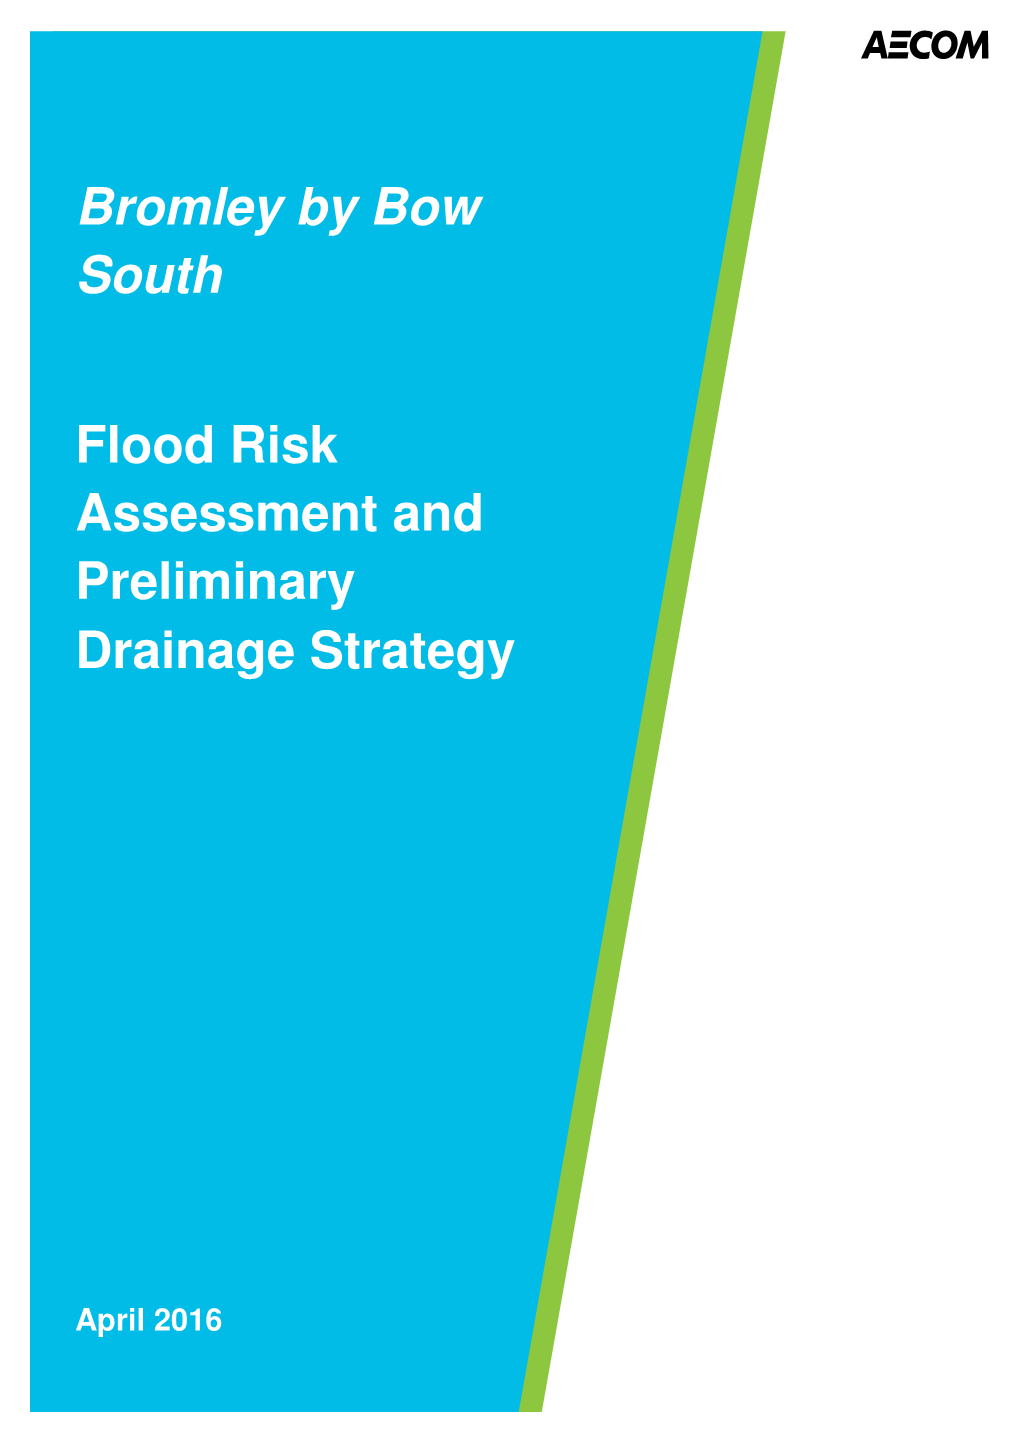 Bromley by Bow South Flood Risk Assessment and Preliminary